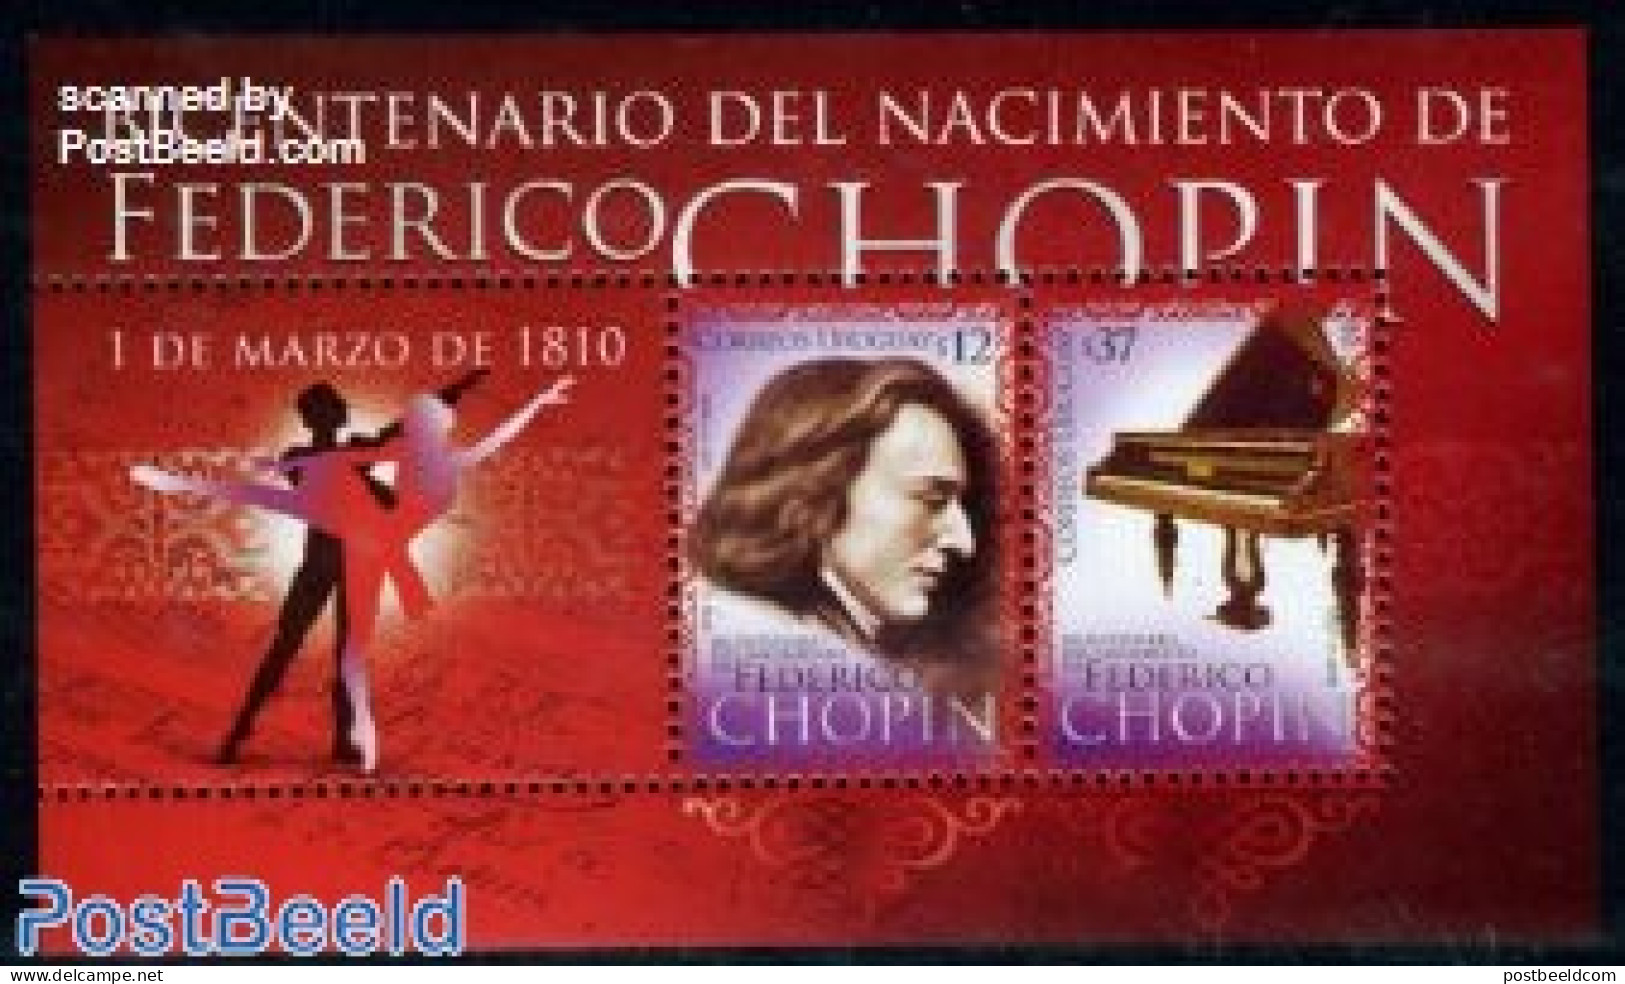 Uruguay 2010 Frederic Chopin S/s, Mint NH, Performance Art - Music - Musical Instruments - Musique